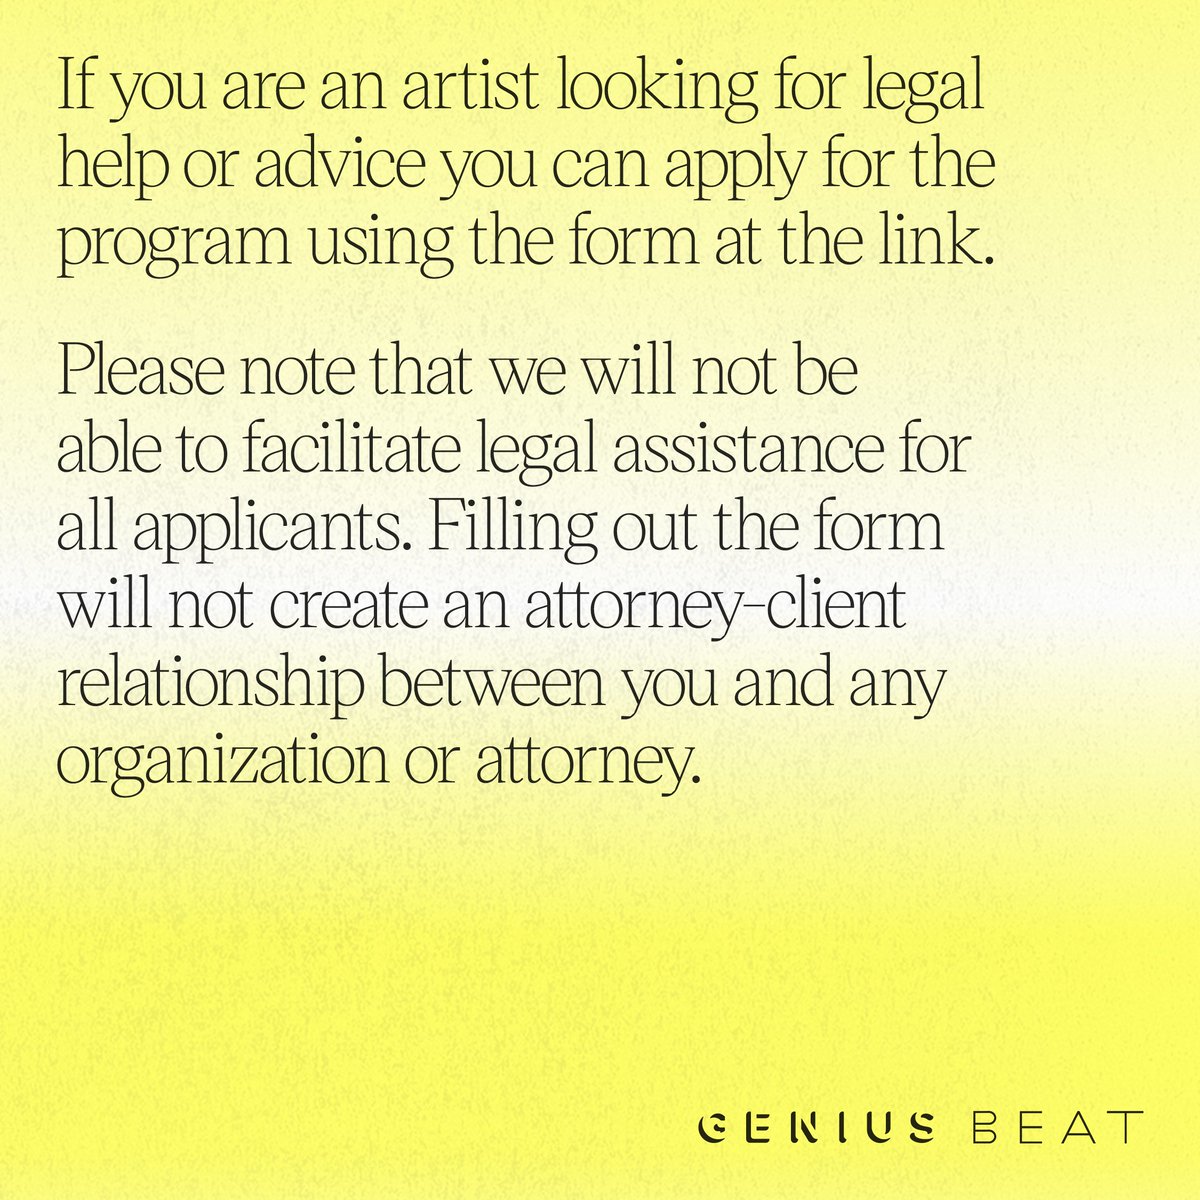 proud to offer: access to potential legal services; as part of the continuation of our #GeniusBEAT program. 

apply here: so.genius.com/Xtq2uDl